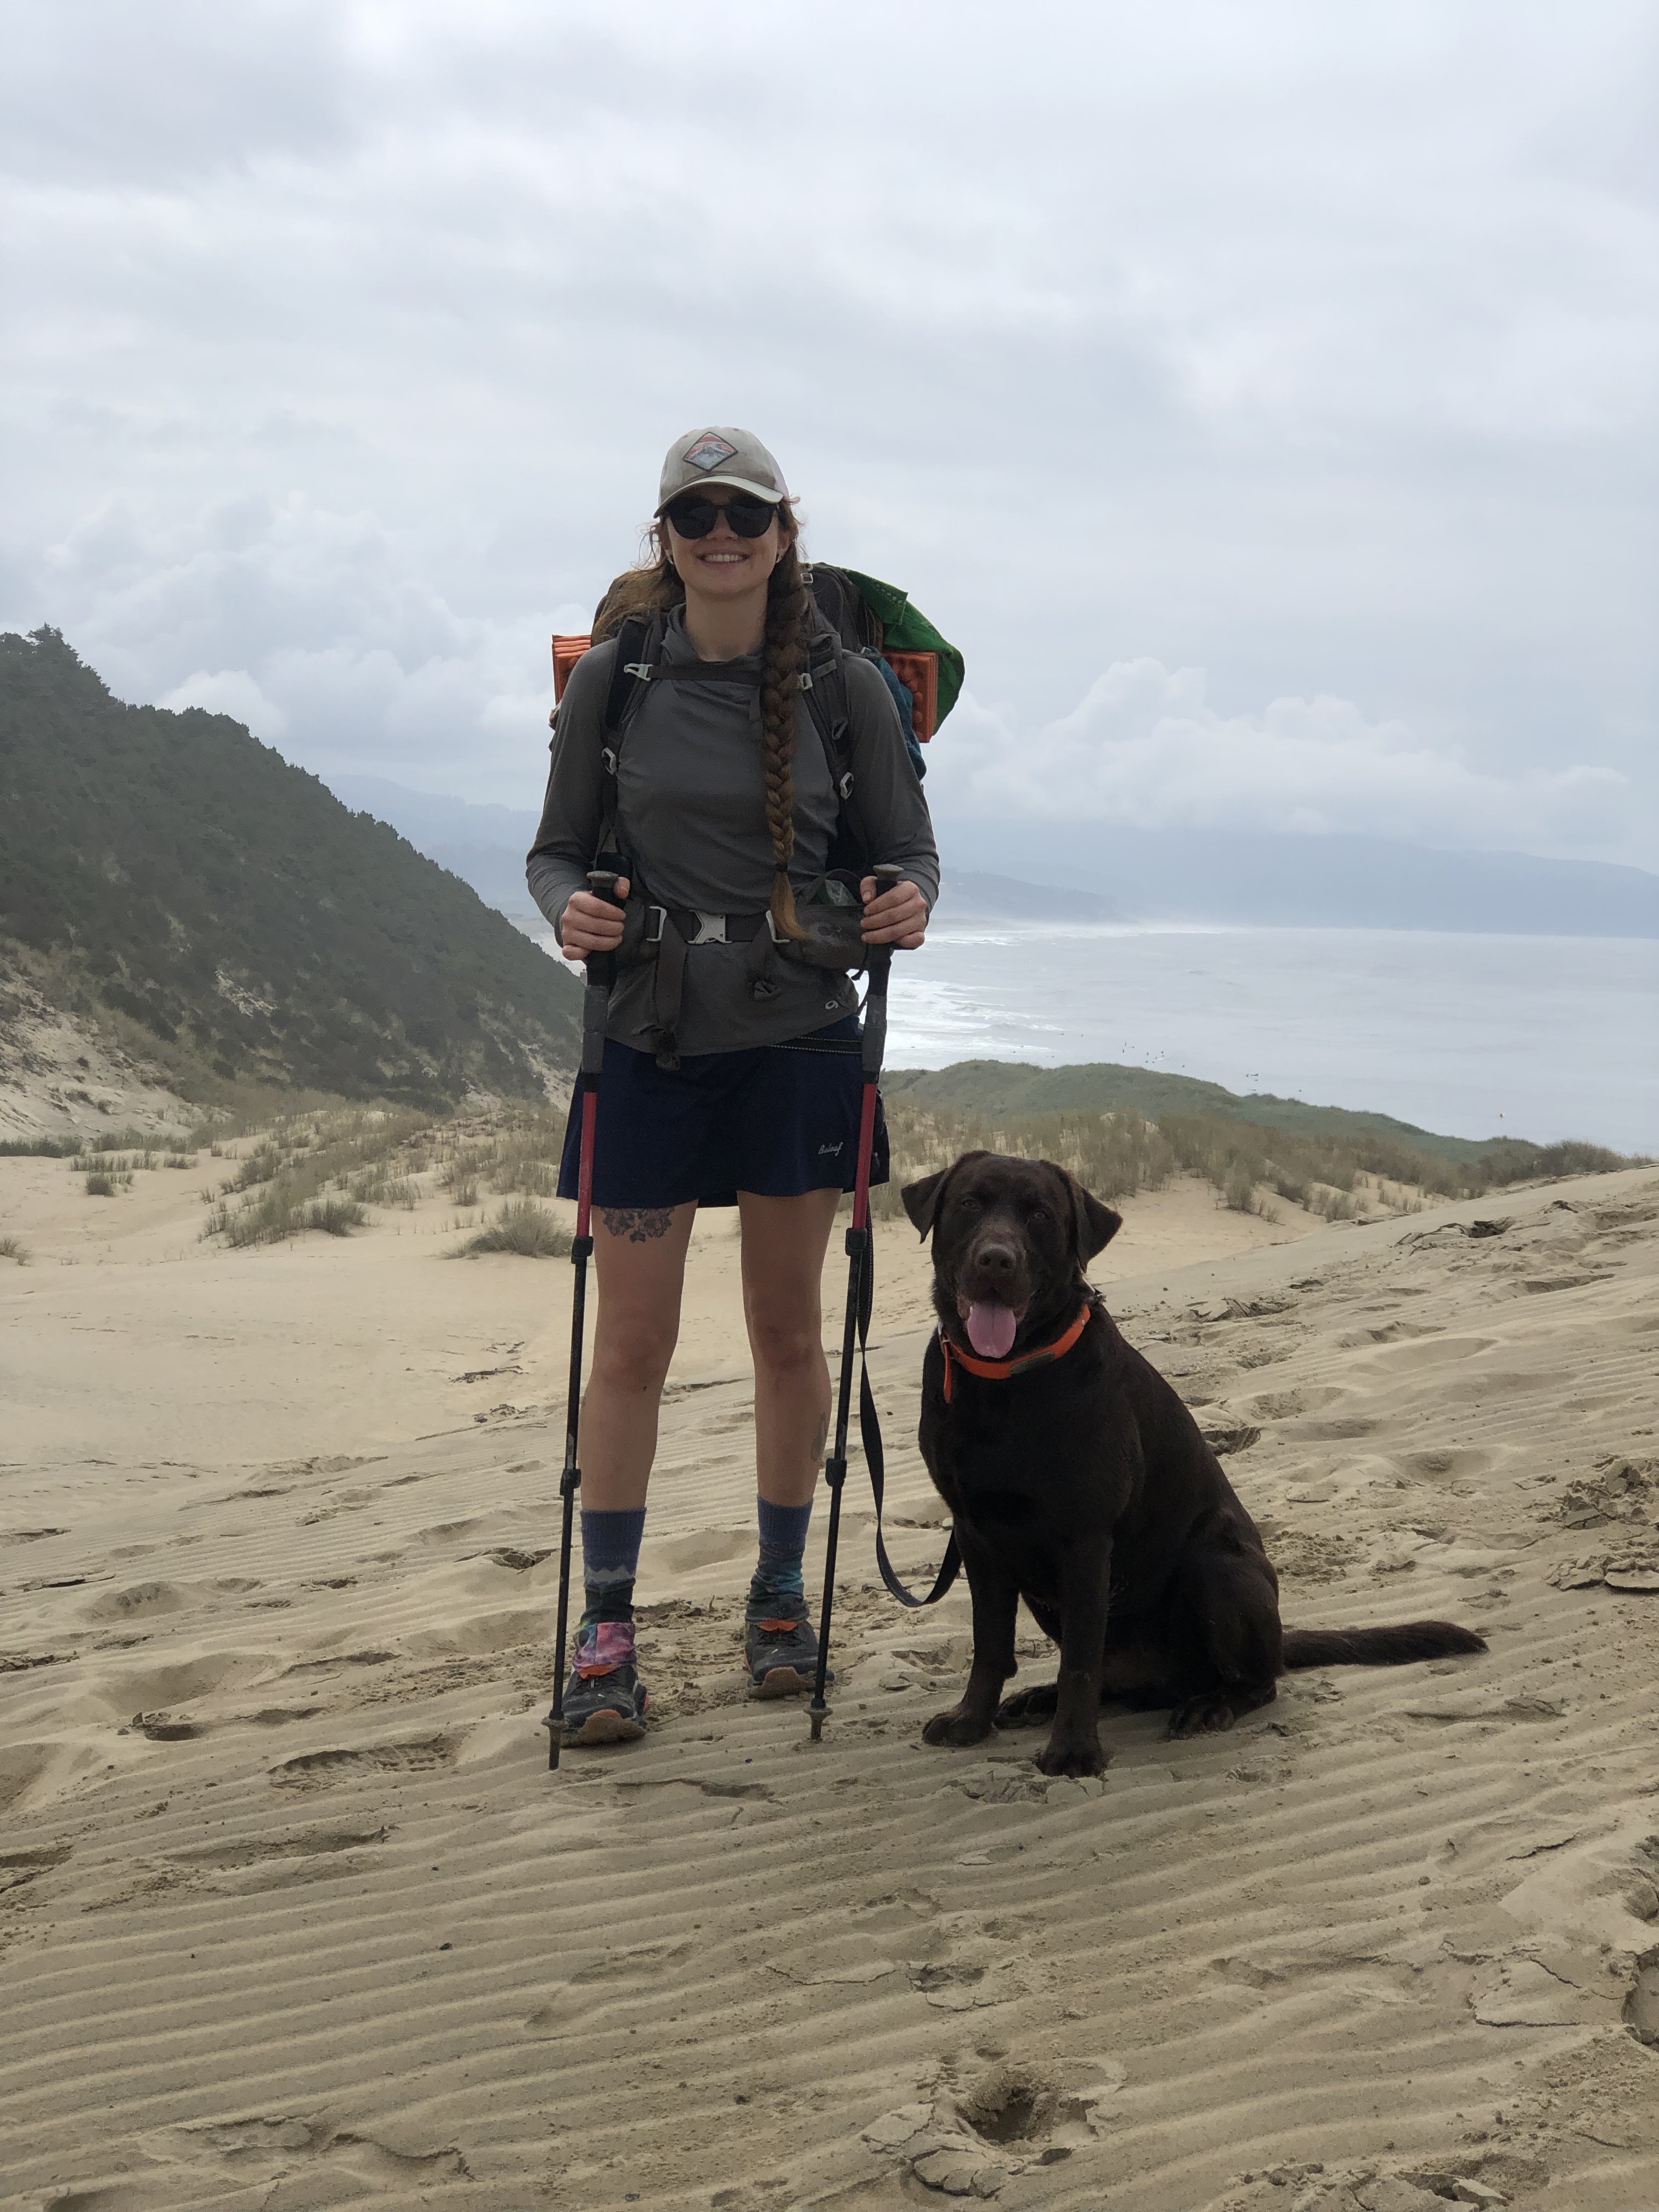 Woman with long braid,backpacking backpack, sunglasses, hat and hiking pole with large brown dog on sand dune overlooking ocean